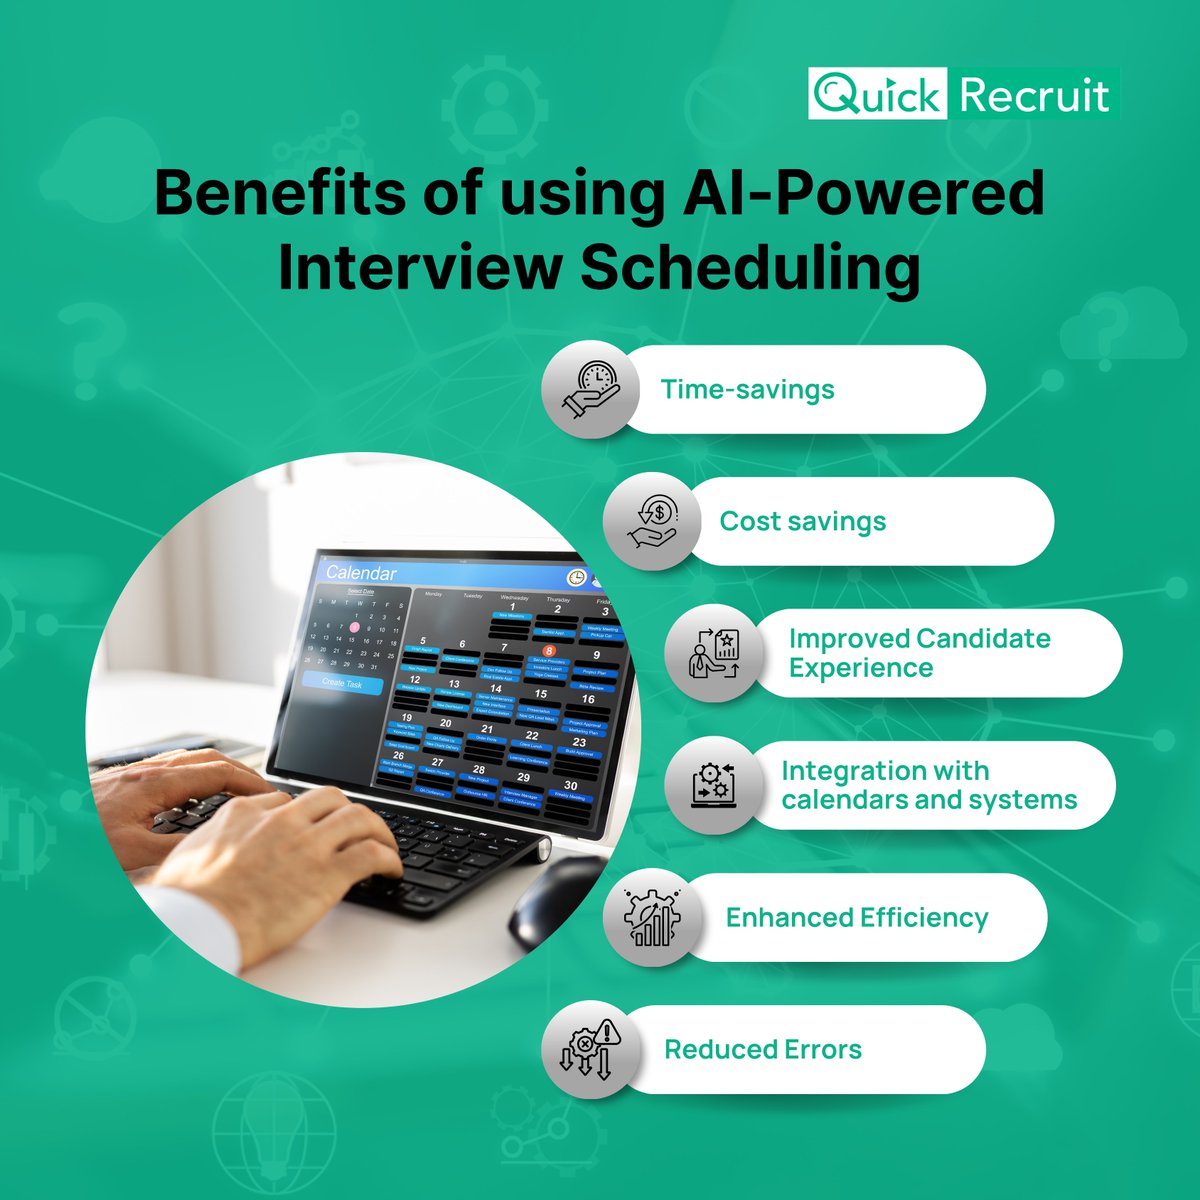 Check out the benefits of modern AI-Powered Interview Scheduling. 

Check out our platform to Streamline your Recruitment process: quickrecruit.com

#aIInterviewscheduling #aiinterviews #efficiencyboost #interviewasaservice #virtualinterviews #quickrecruit